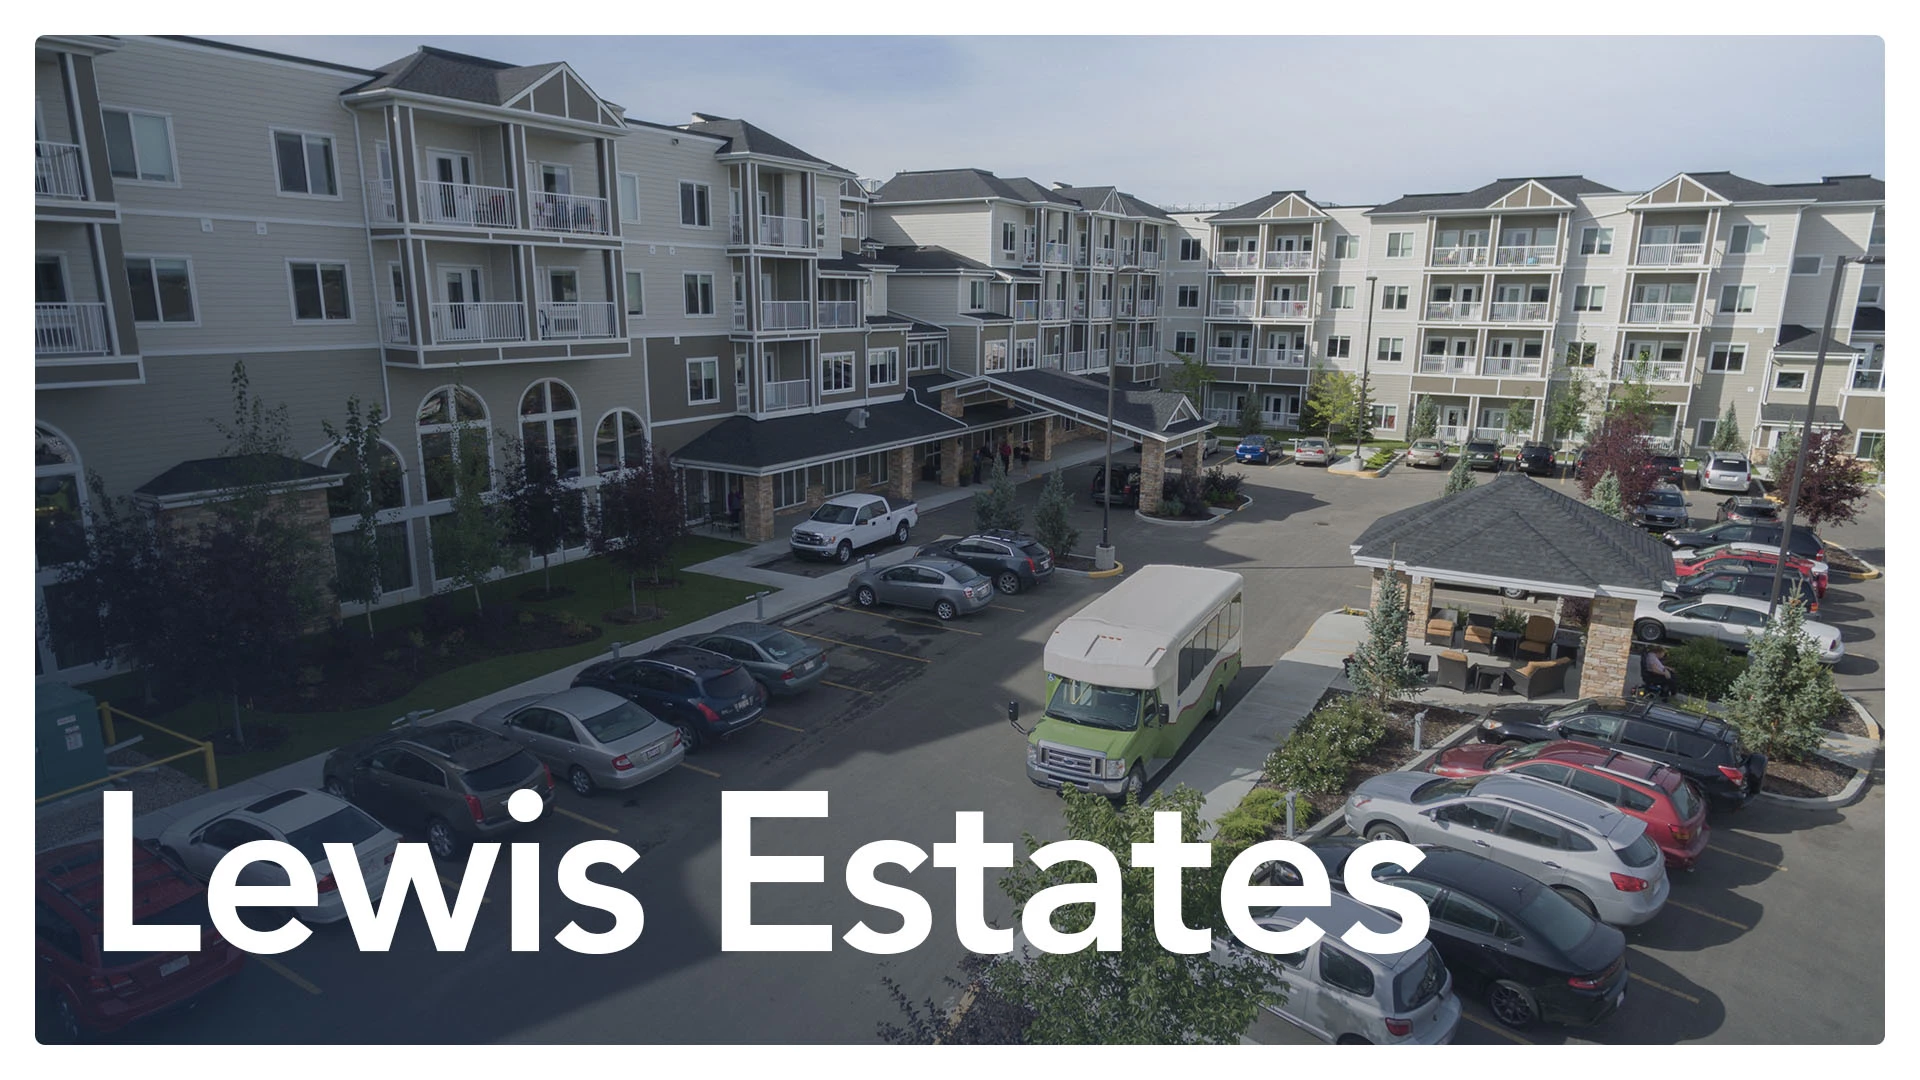 Lewis Estates exterior with text and gradient overlay